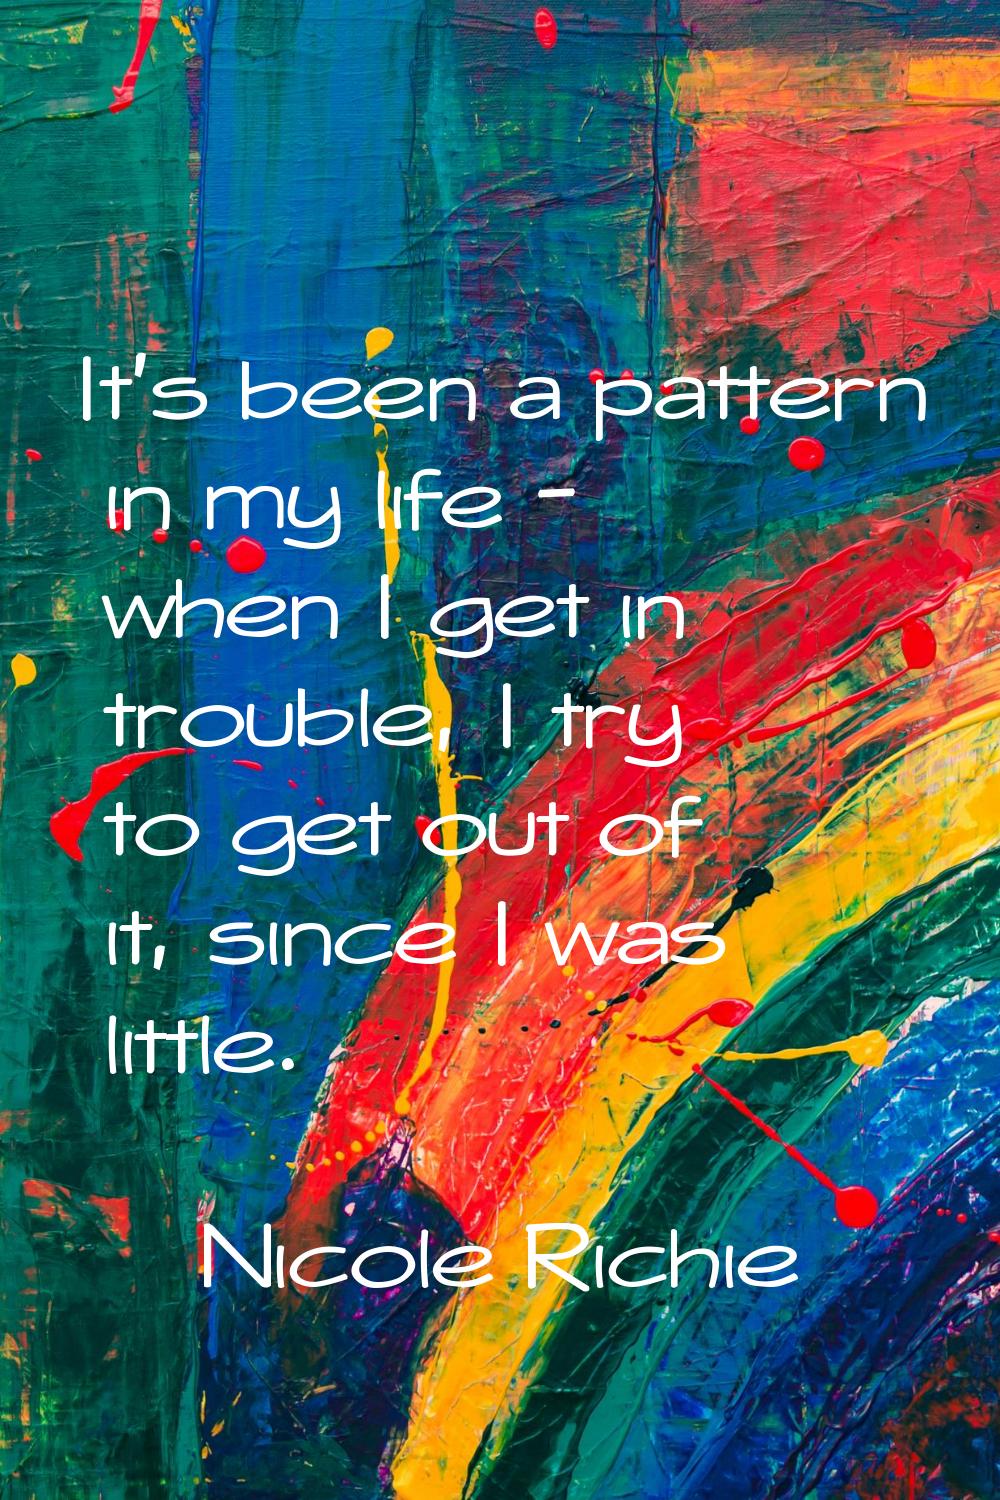 It's been a pattern in my life - when I get in trouble, I try to get out of it, since I was little.